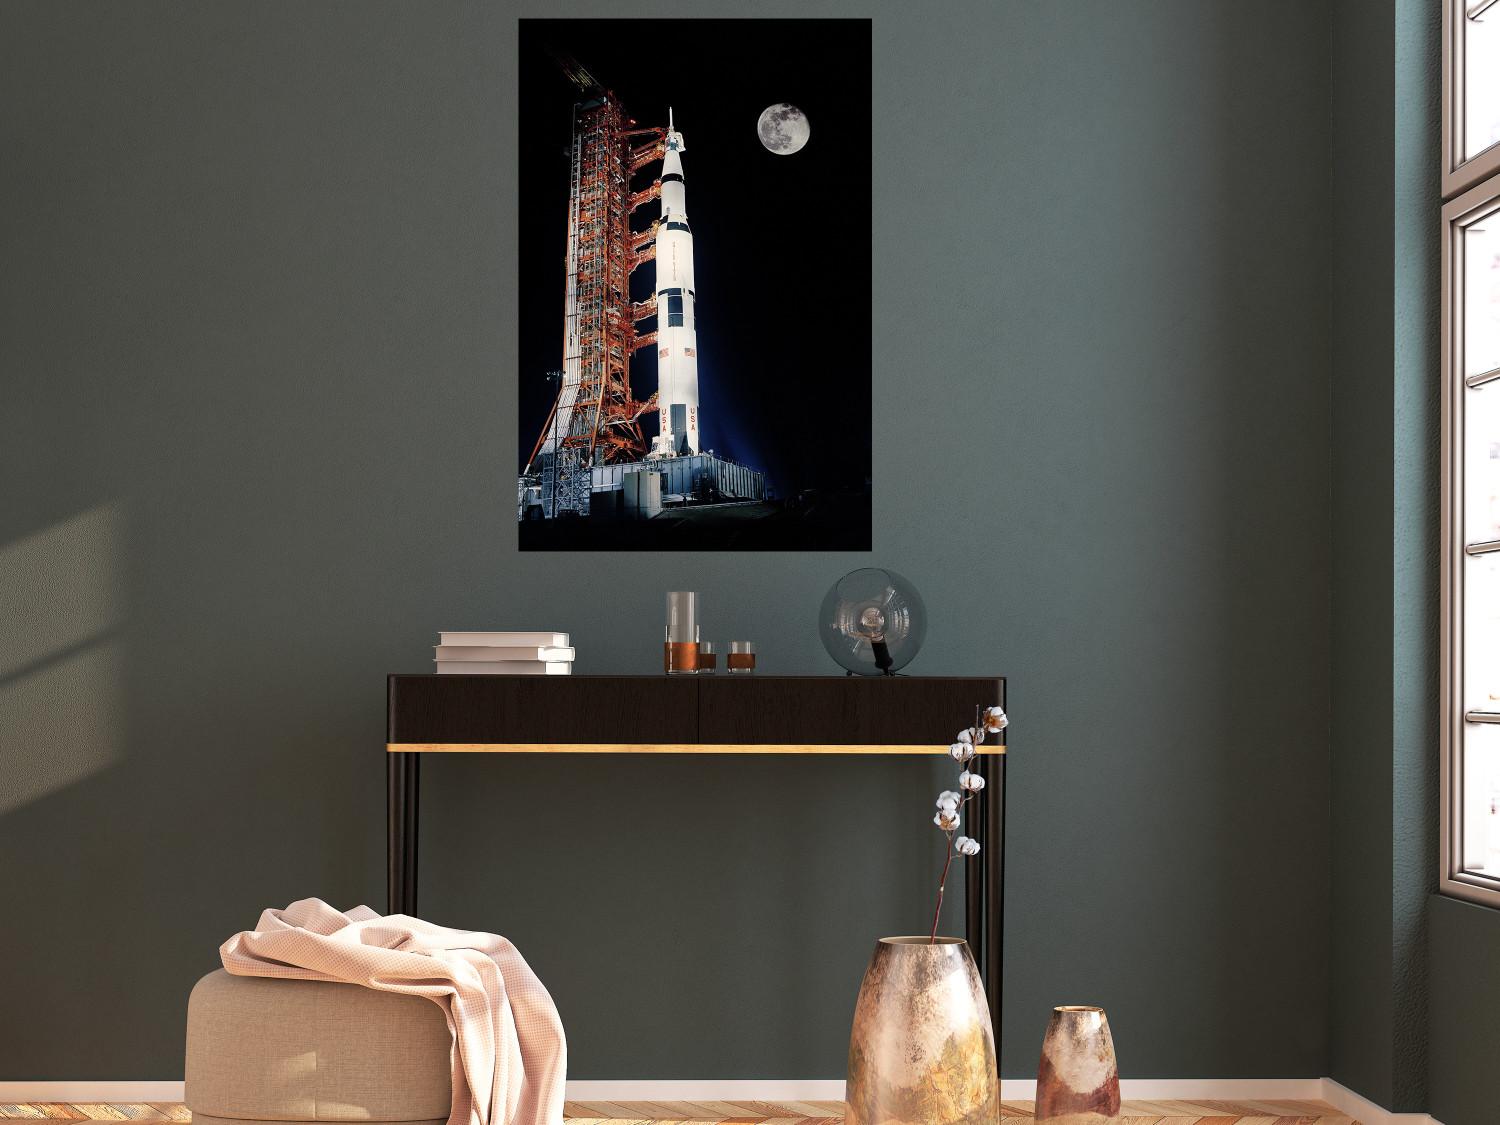 Poster Destination - illuminated rocket in a docking station against the moon backdrop